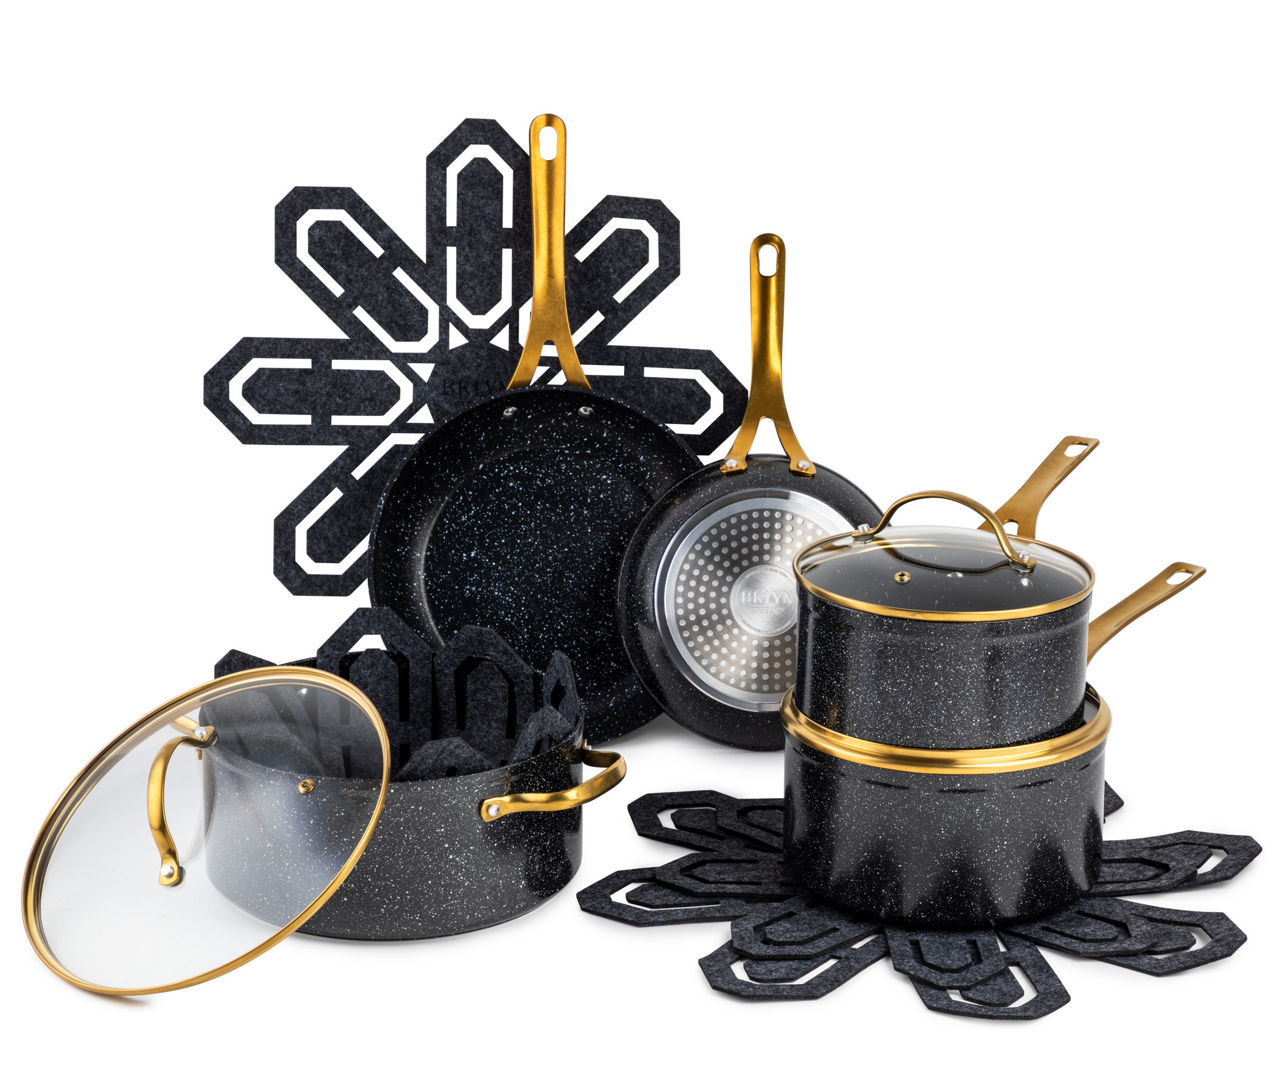 Styled Settings Black and Gold Nonstick Stainless Steel Pots and Pans Set